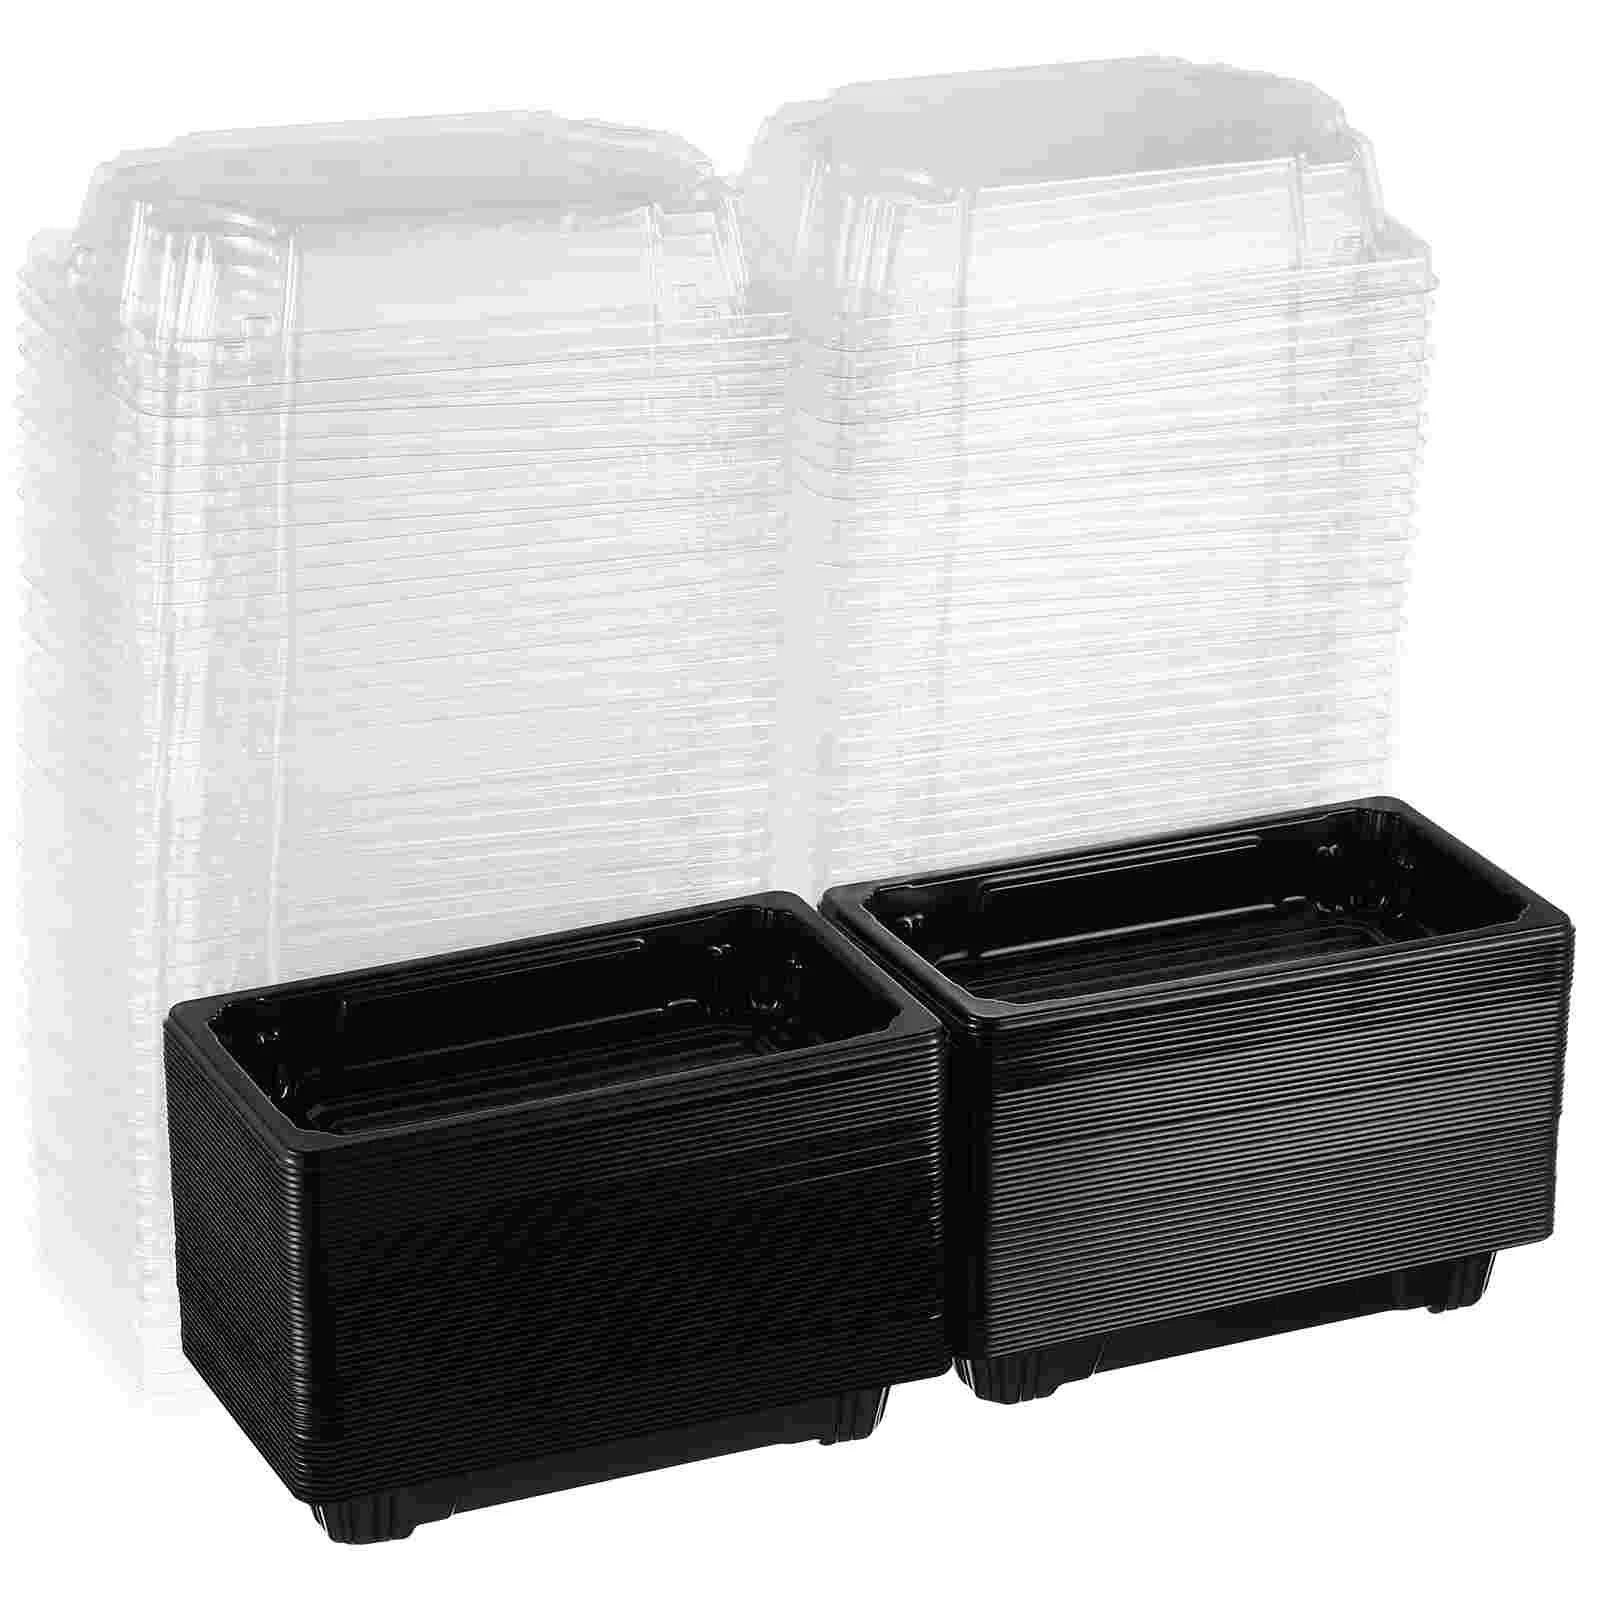 

100 PCS Clear Plastic Tray Fruit Boxes Take Out Disposable Pulp Containers Sushi Packing